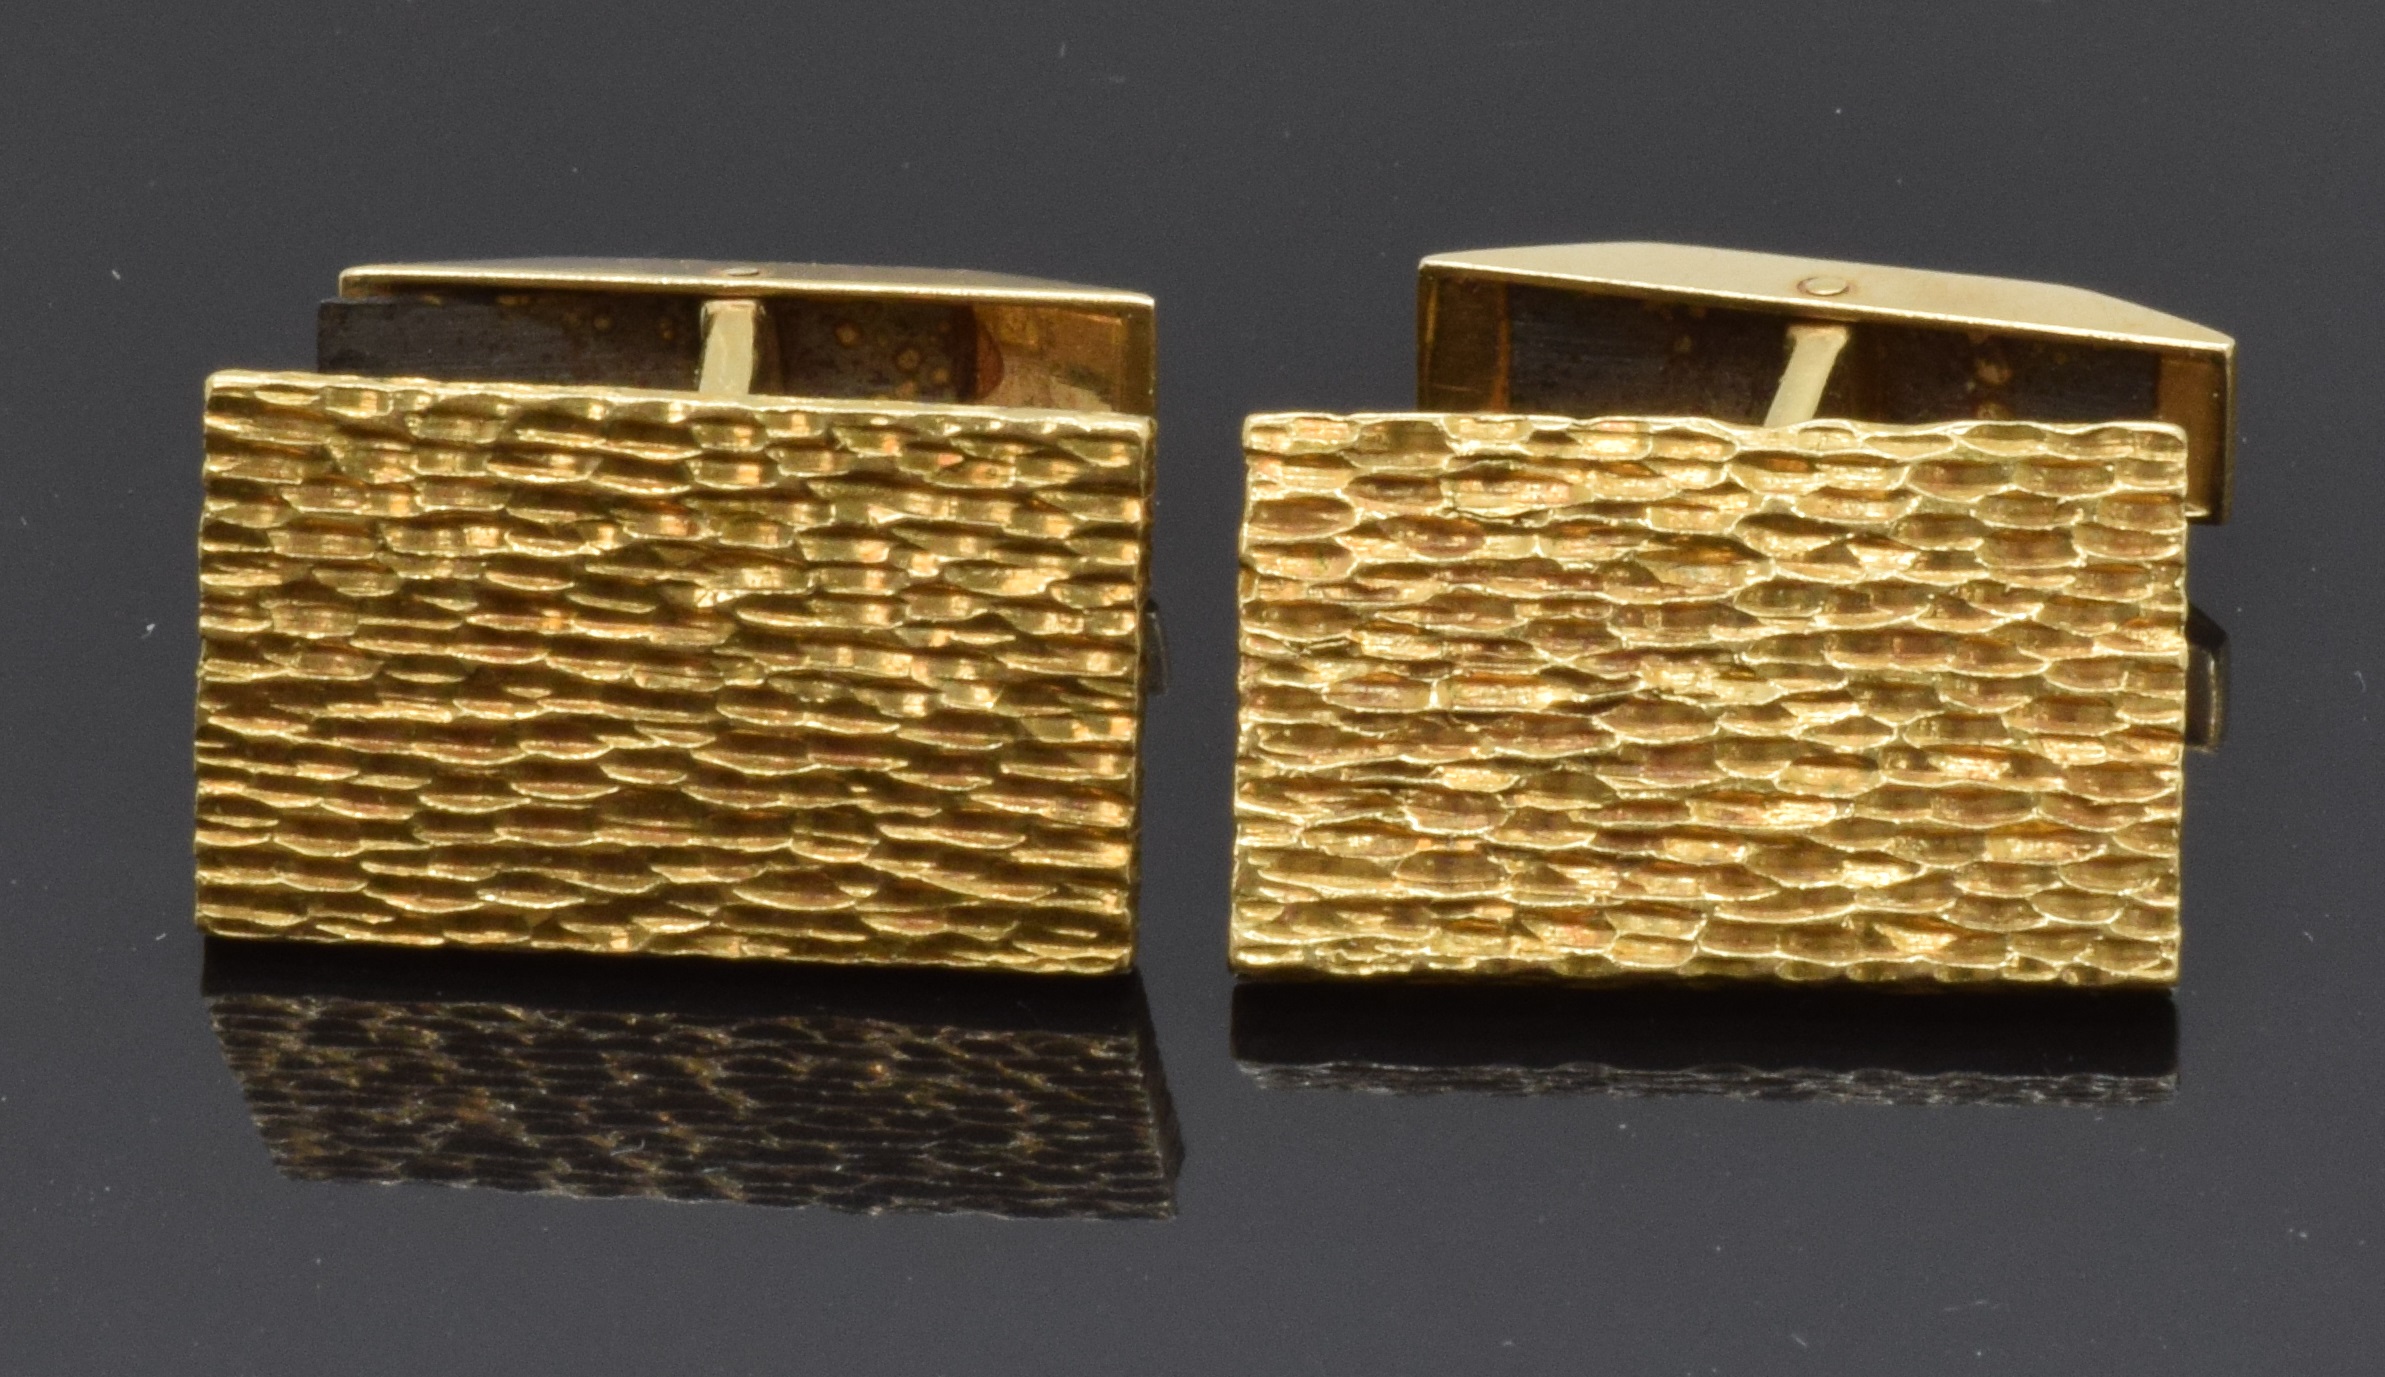 A pair of 18ct gold cufflinks with textured detail, 21.4g